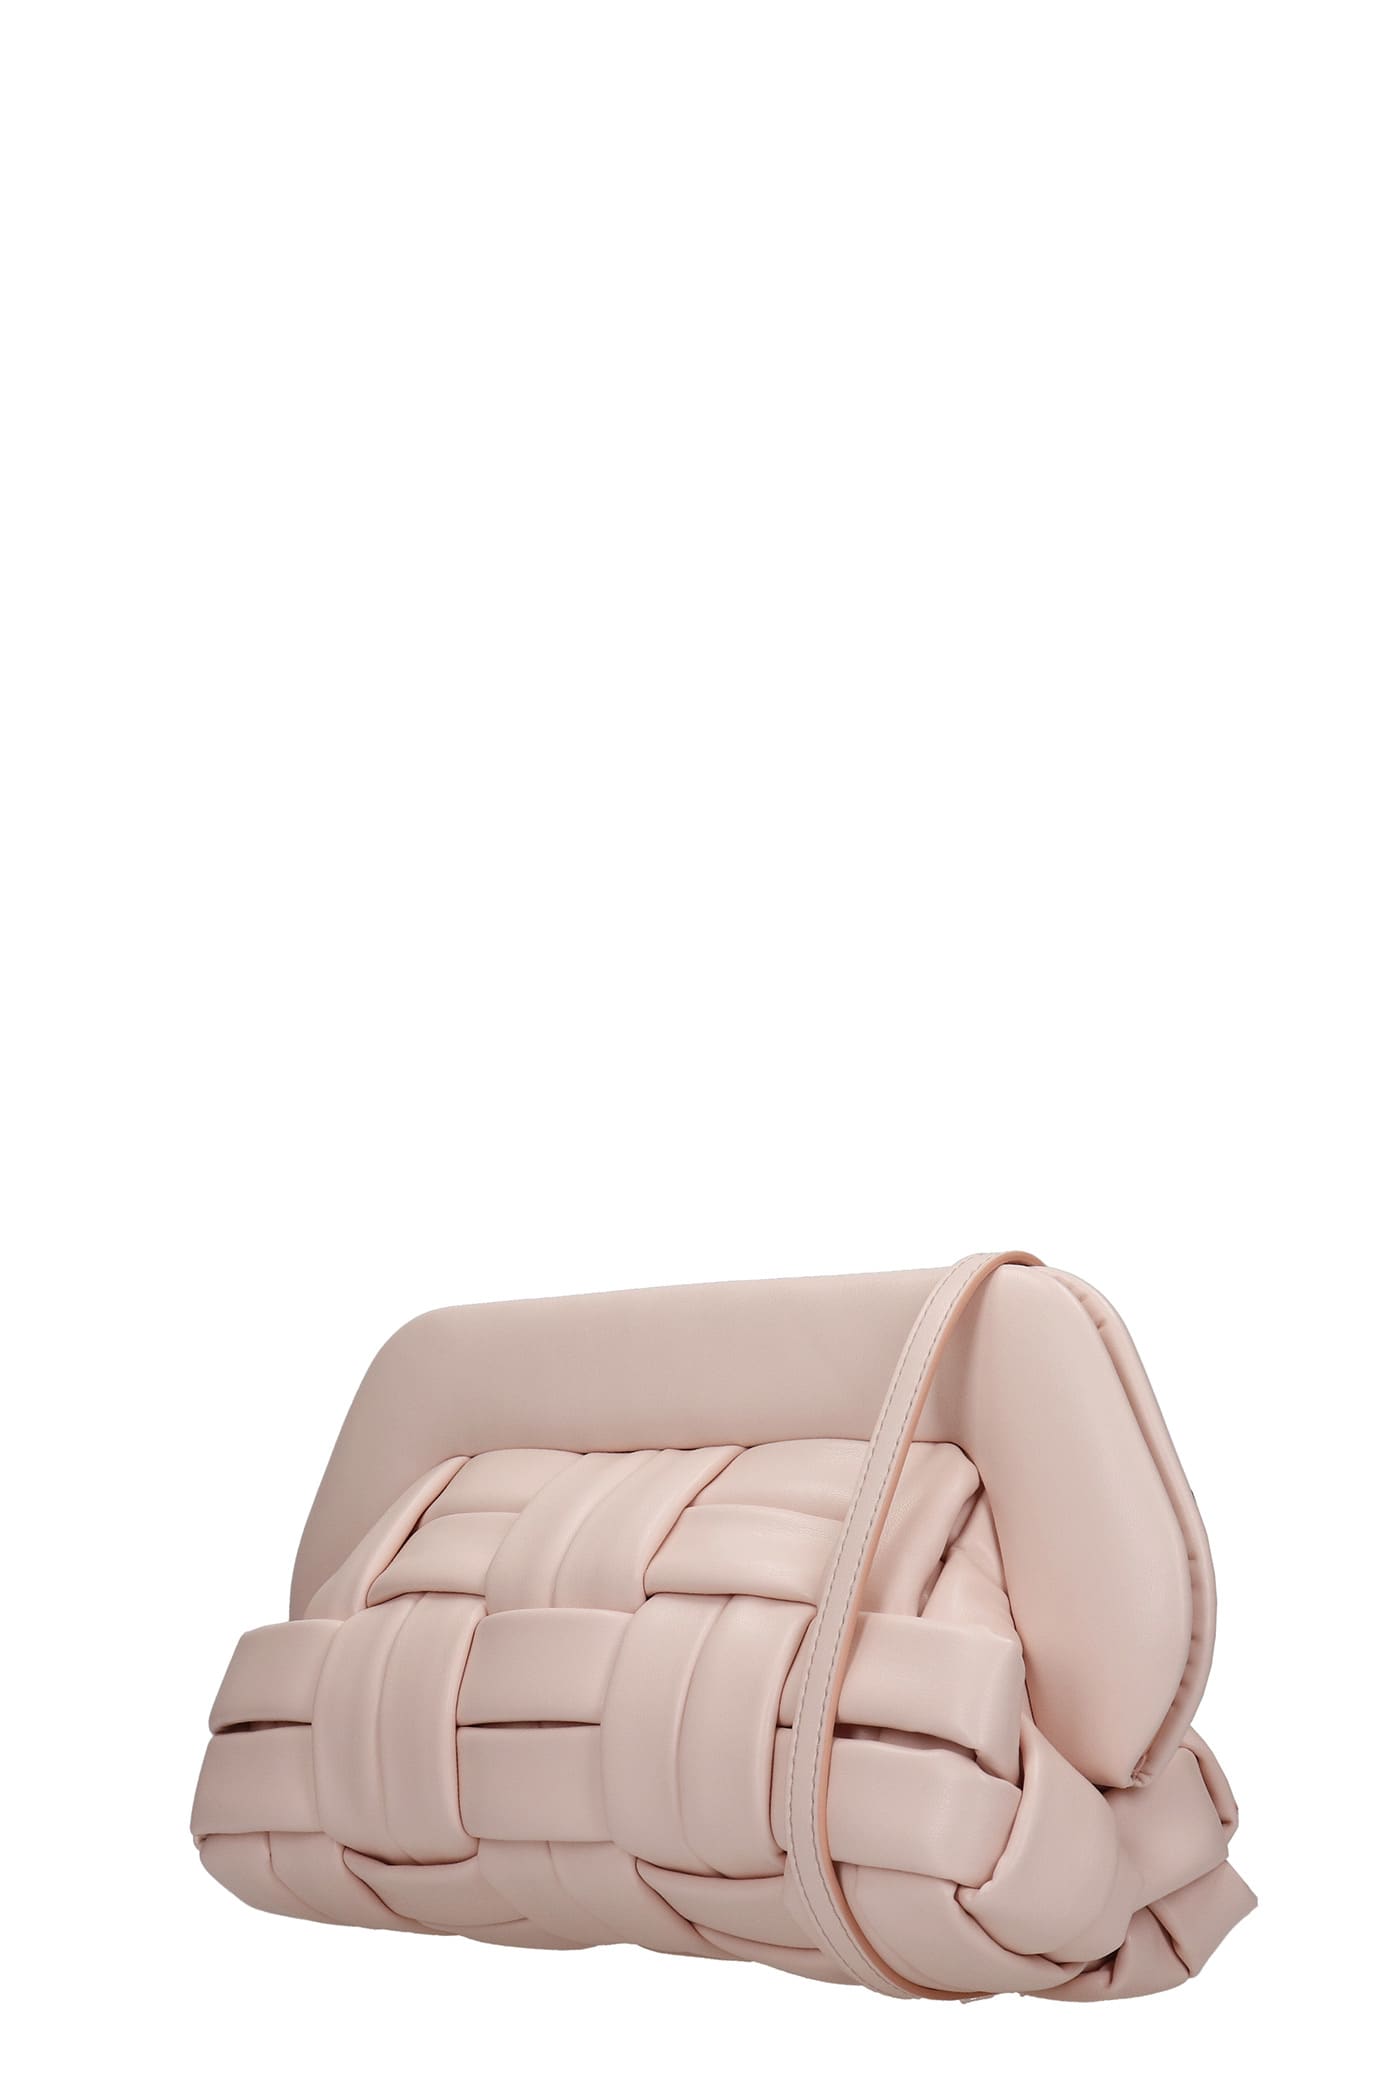 THEMOIRè Bios Weaved Clutch In Rose-pink Faux Leather